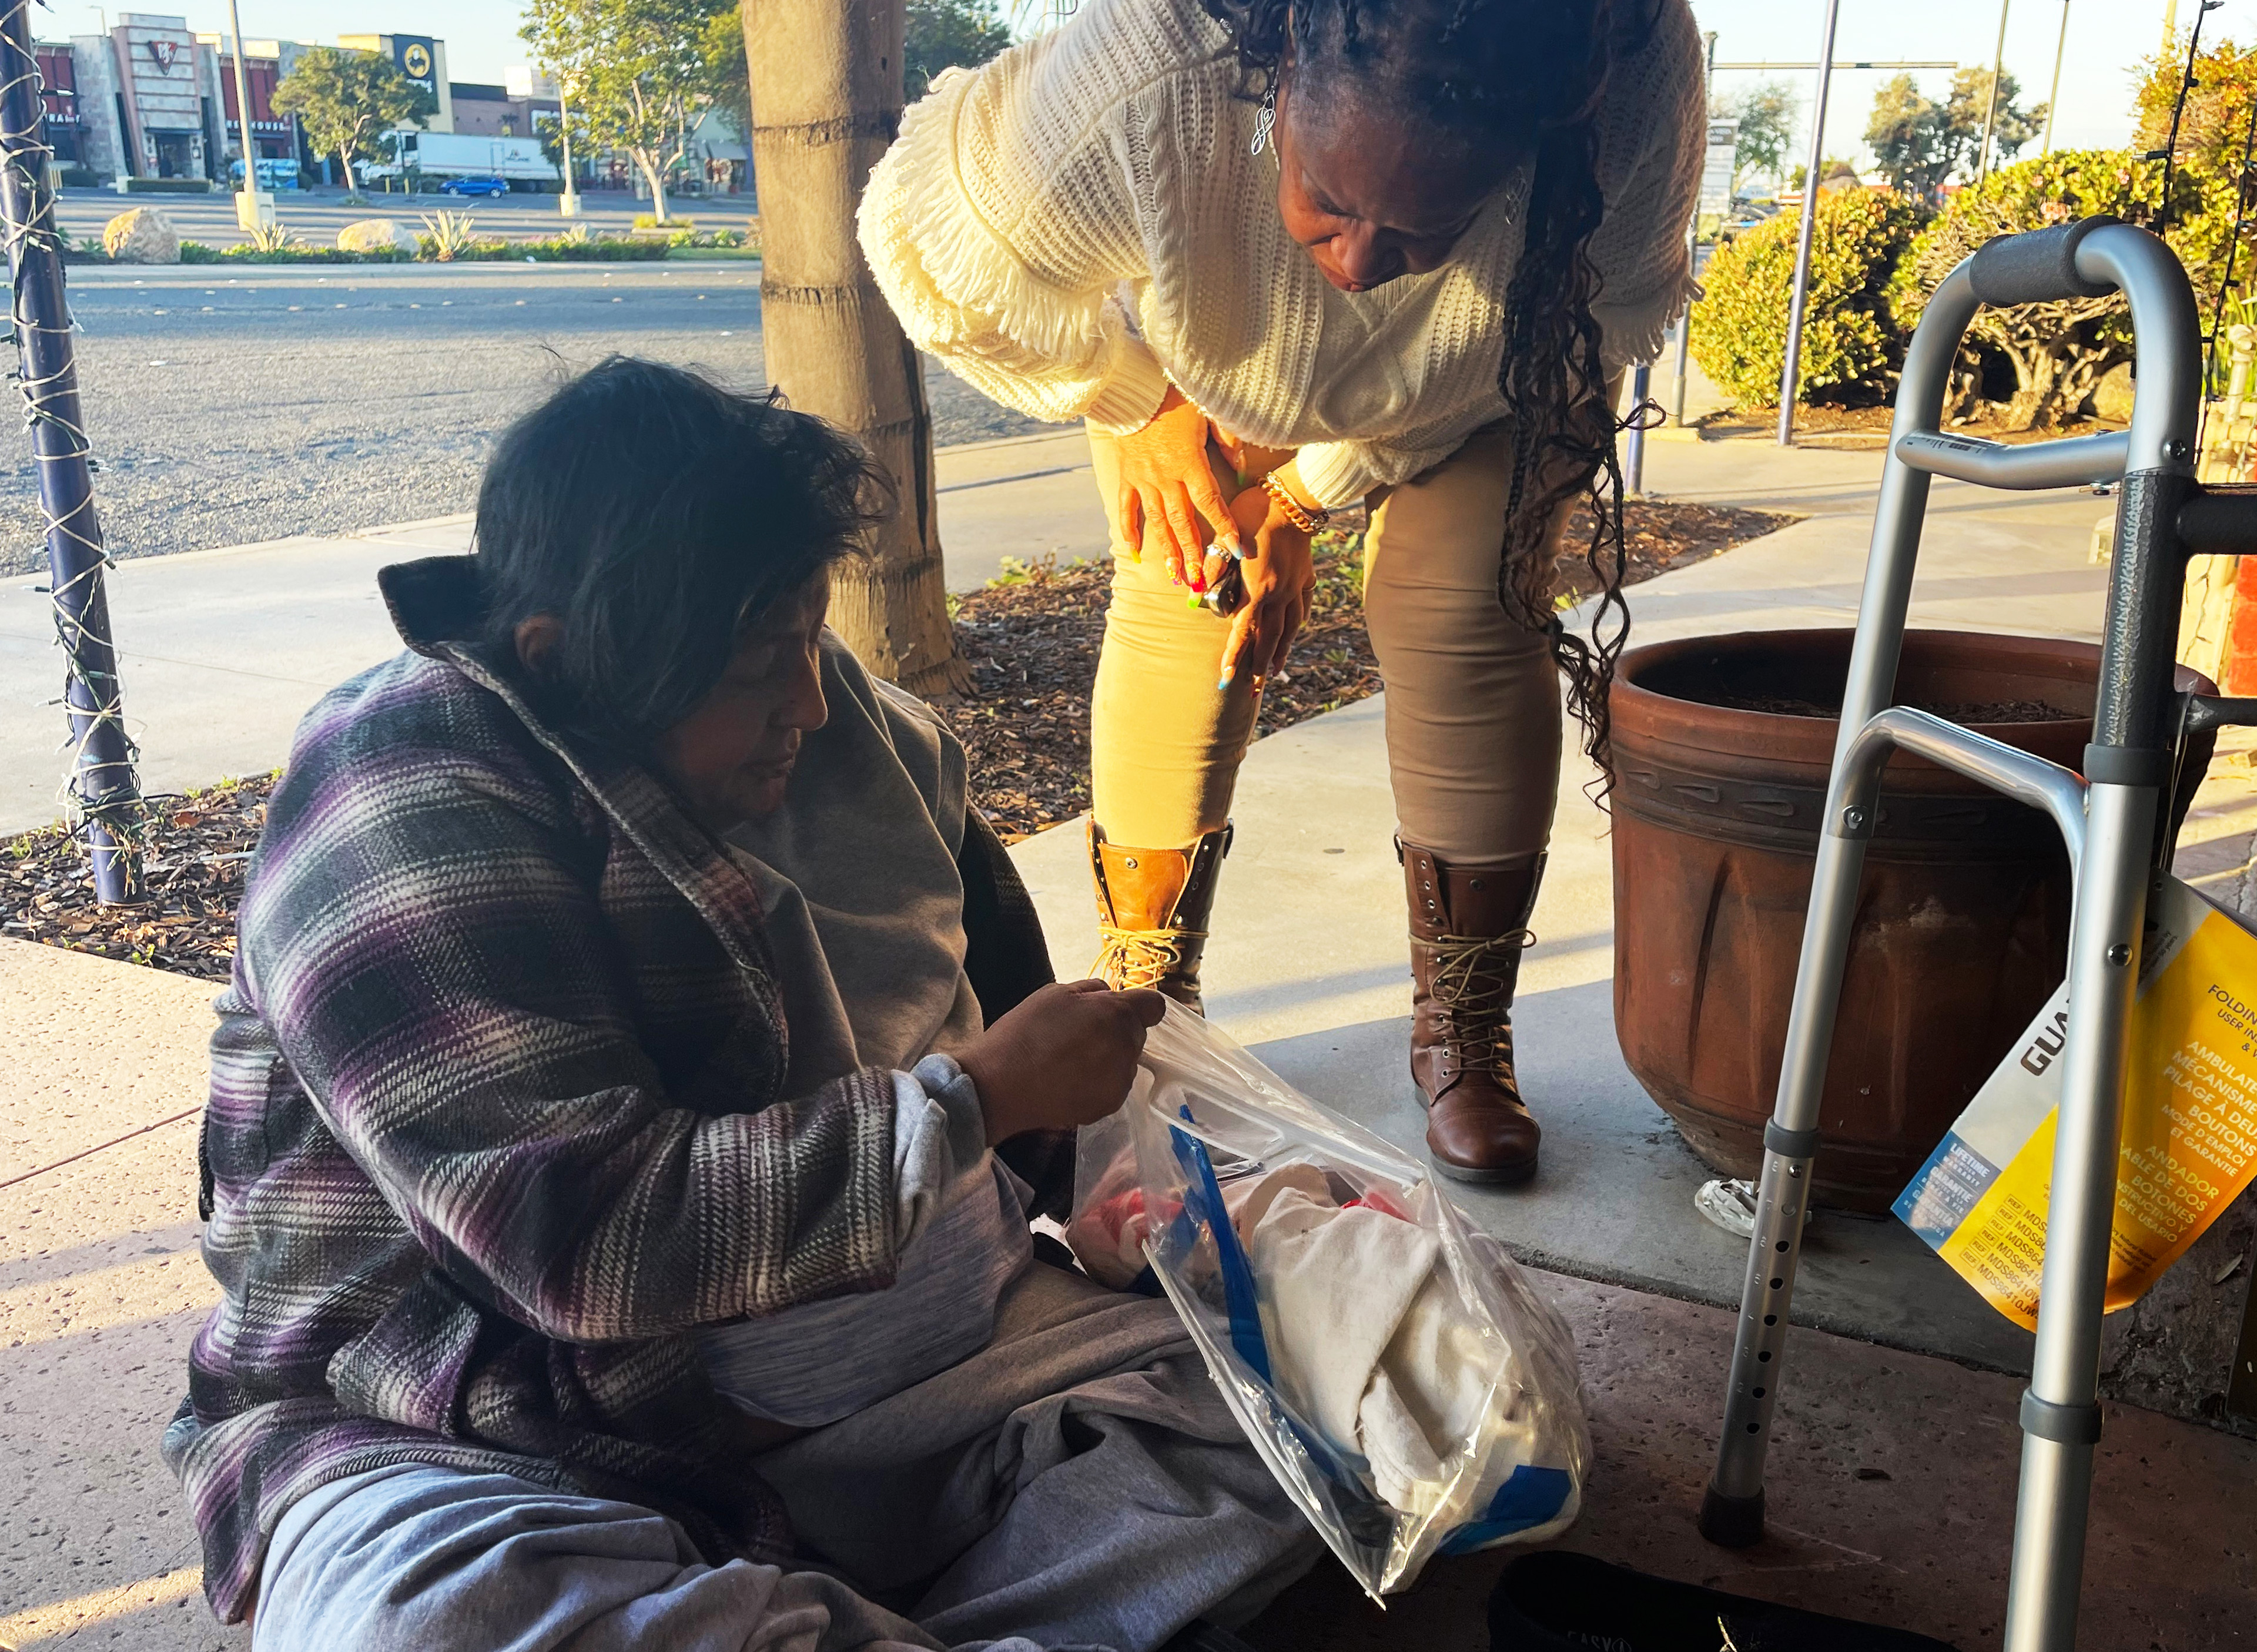 A photo of a homeless woman sitting and looking into a bag of supplies. Another woman is standing and watching her.